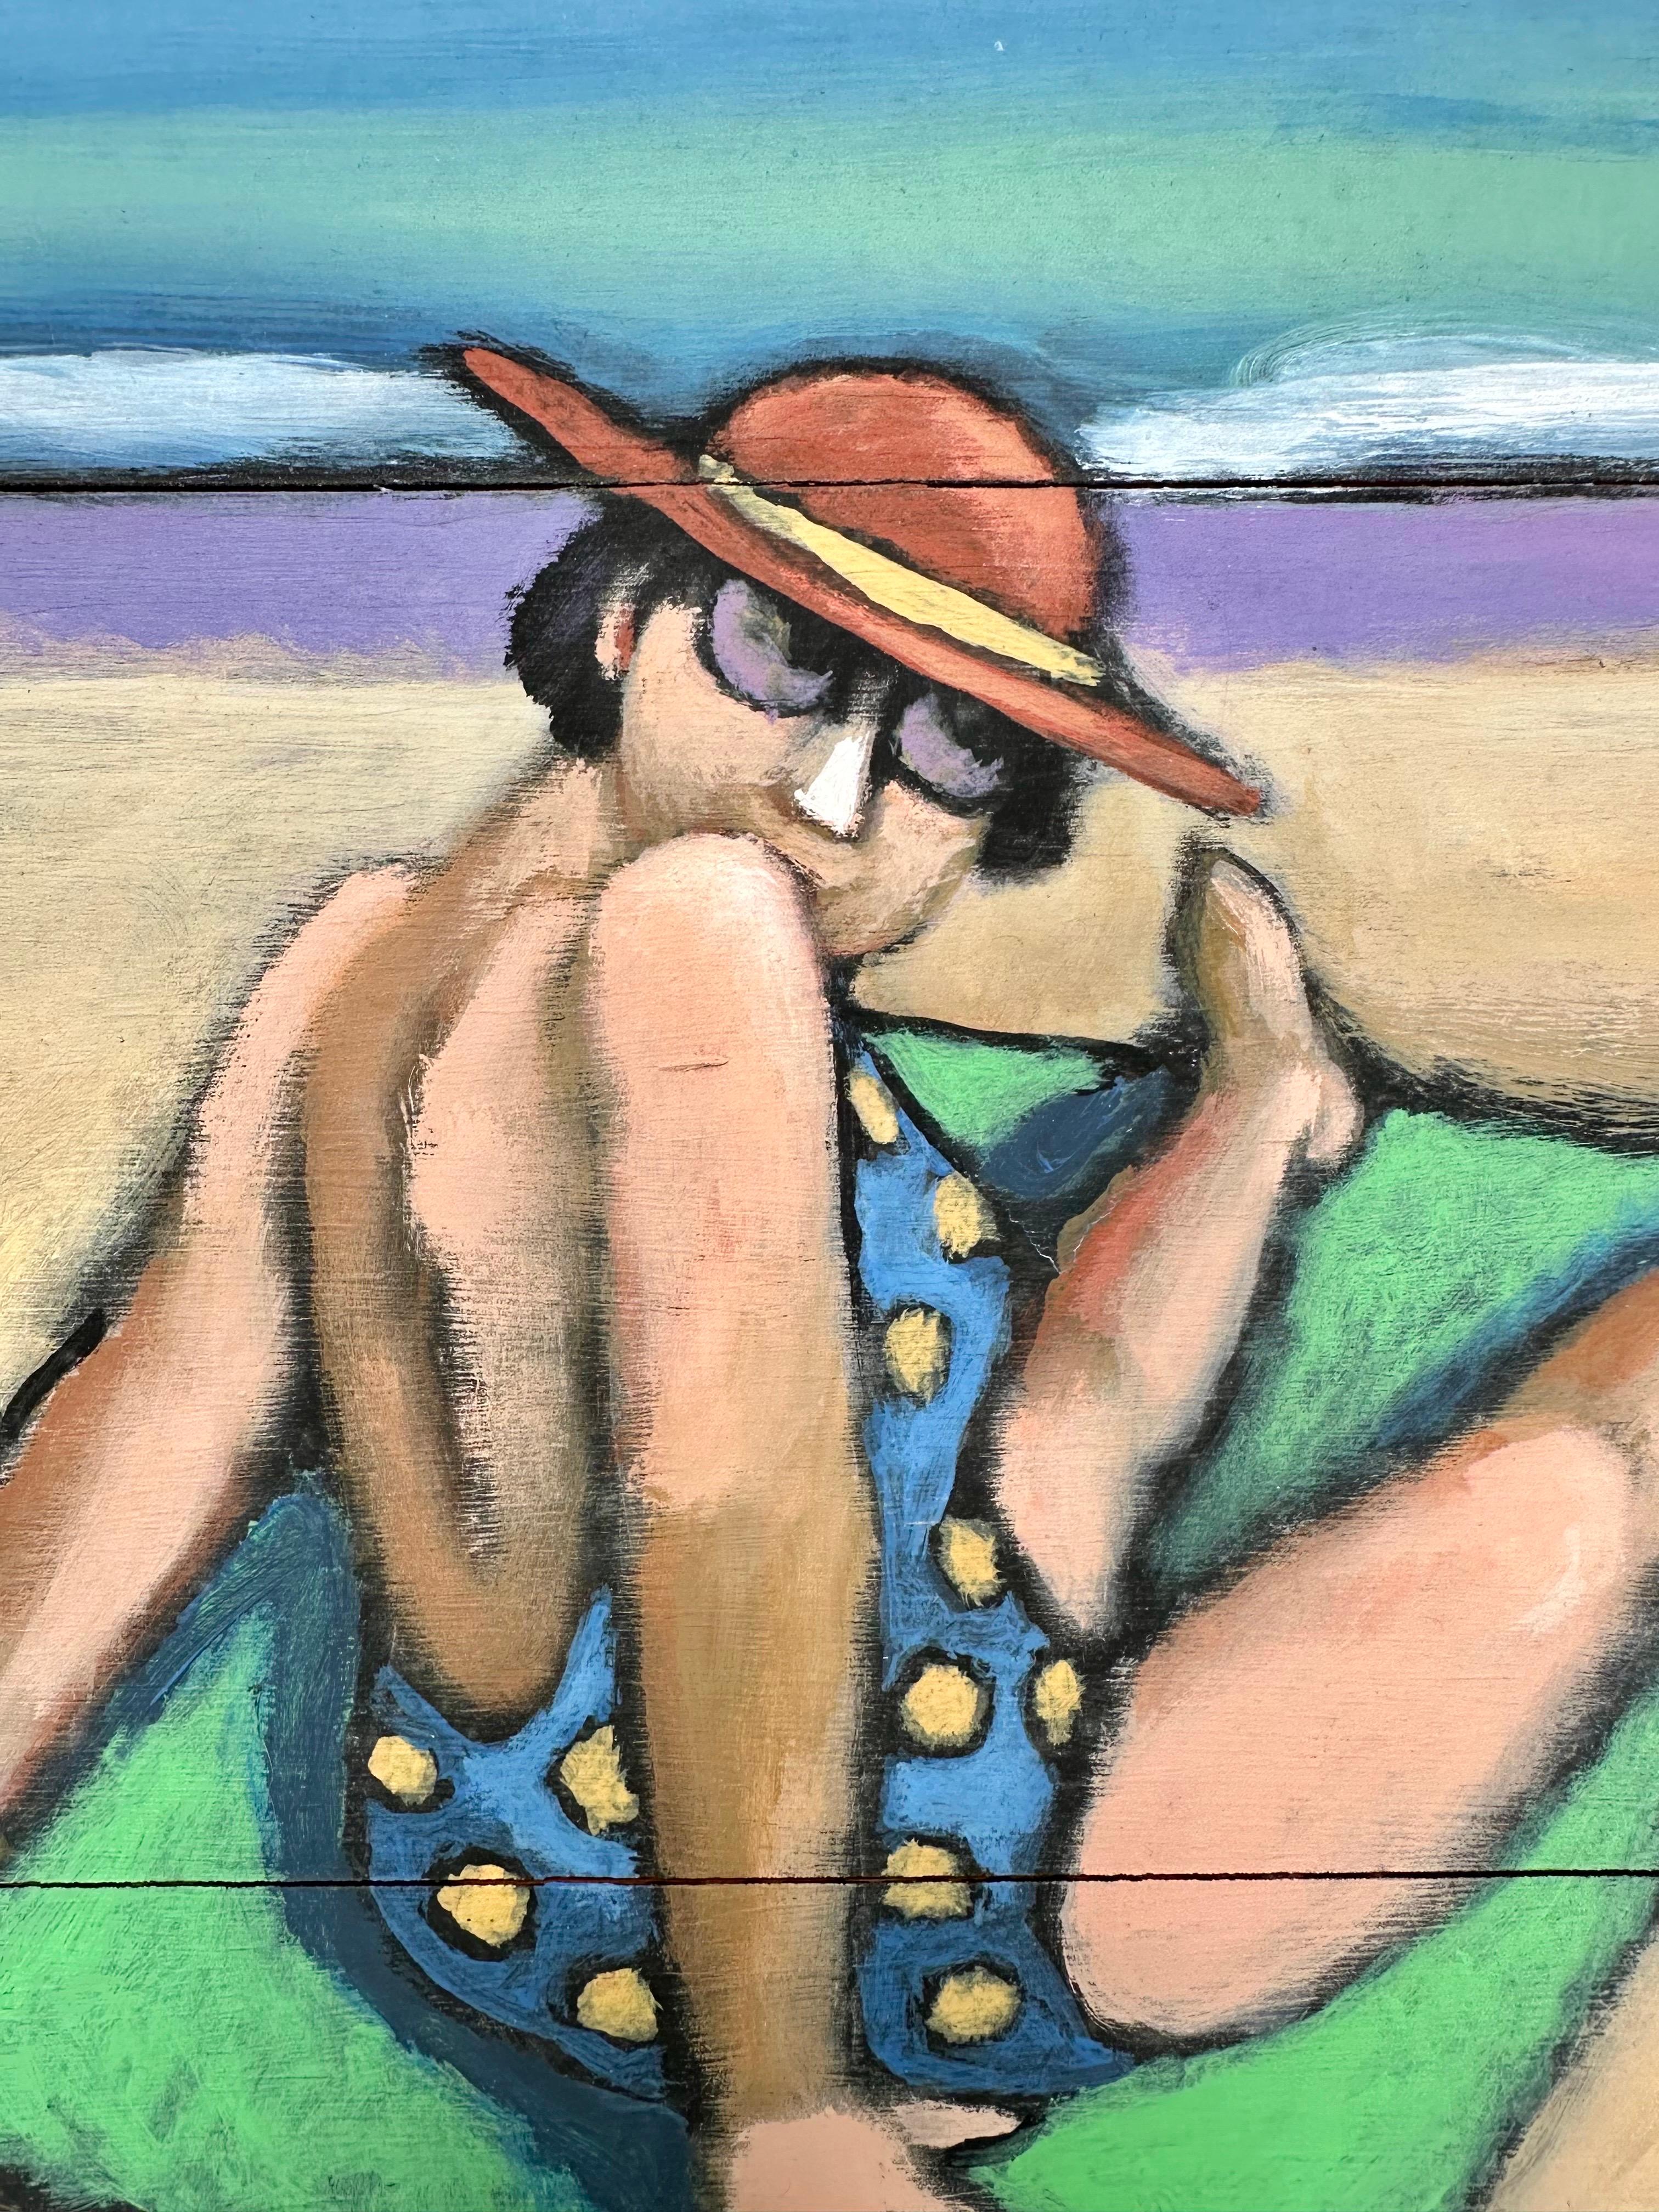 Abstract Impressionist Beach Scene Painting, School of Alfred Chadbourn,
American.

Figurative painting of two sunbathers on the beach. The colorful image is reminiscent of the work of Alfred Chadbourn, the renowned artist from Maine. The artwork,